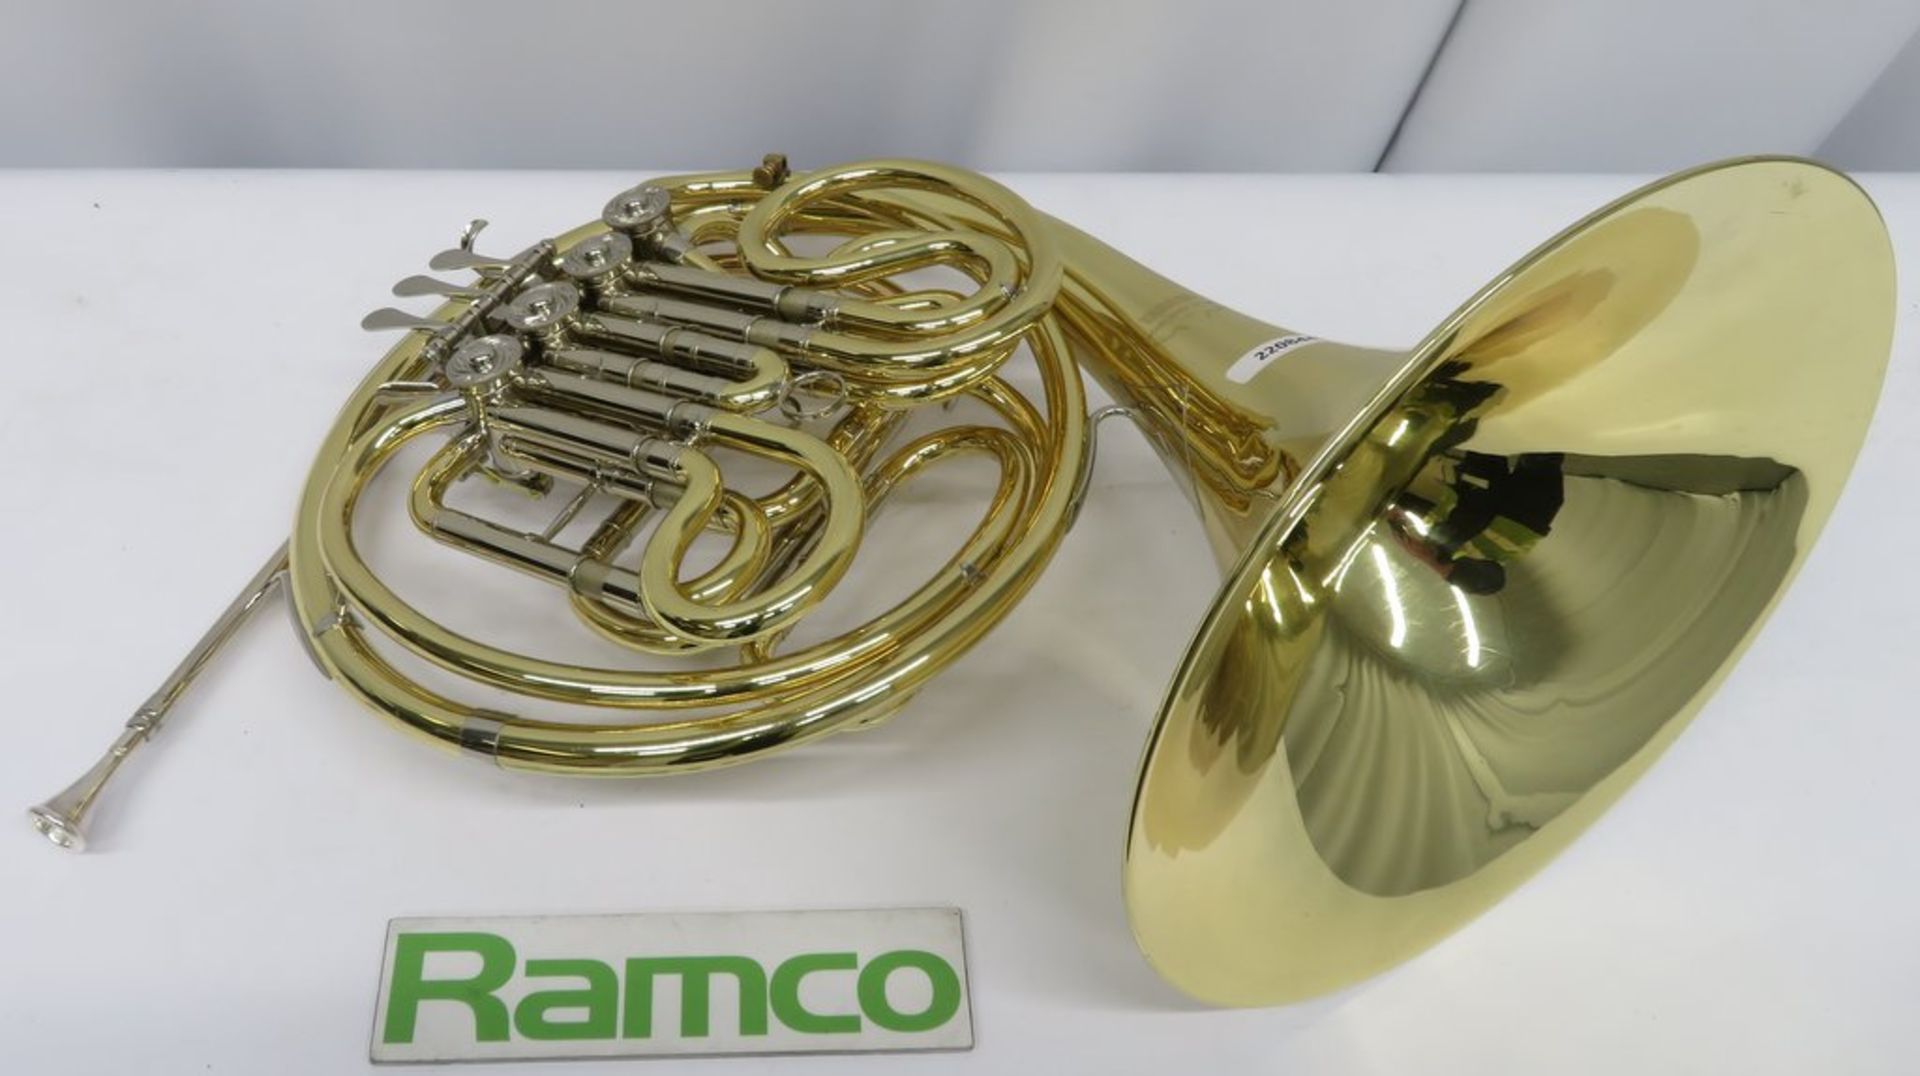 Yamaha YHR 667V French Horn With Case. Serial Number: 001738. This Item Has Not Been Teste - Image 3 of 16